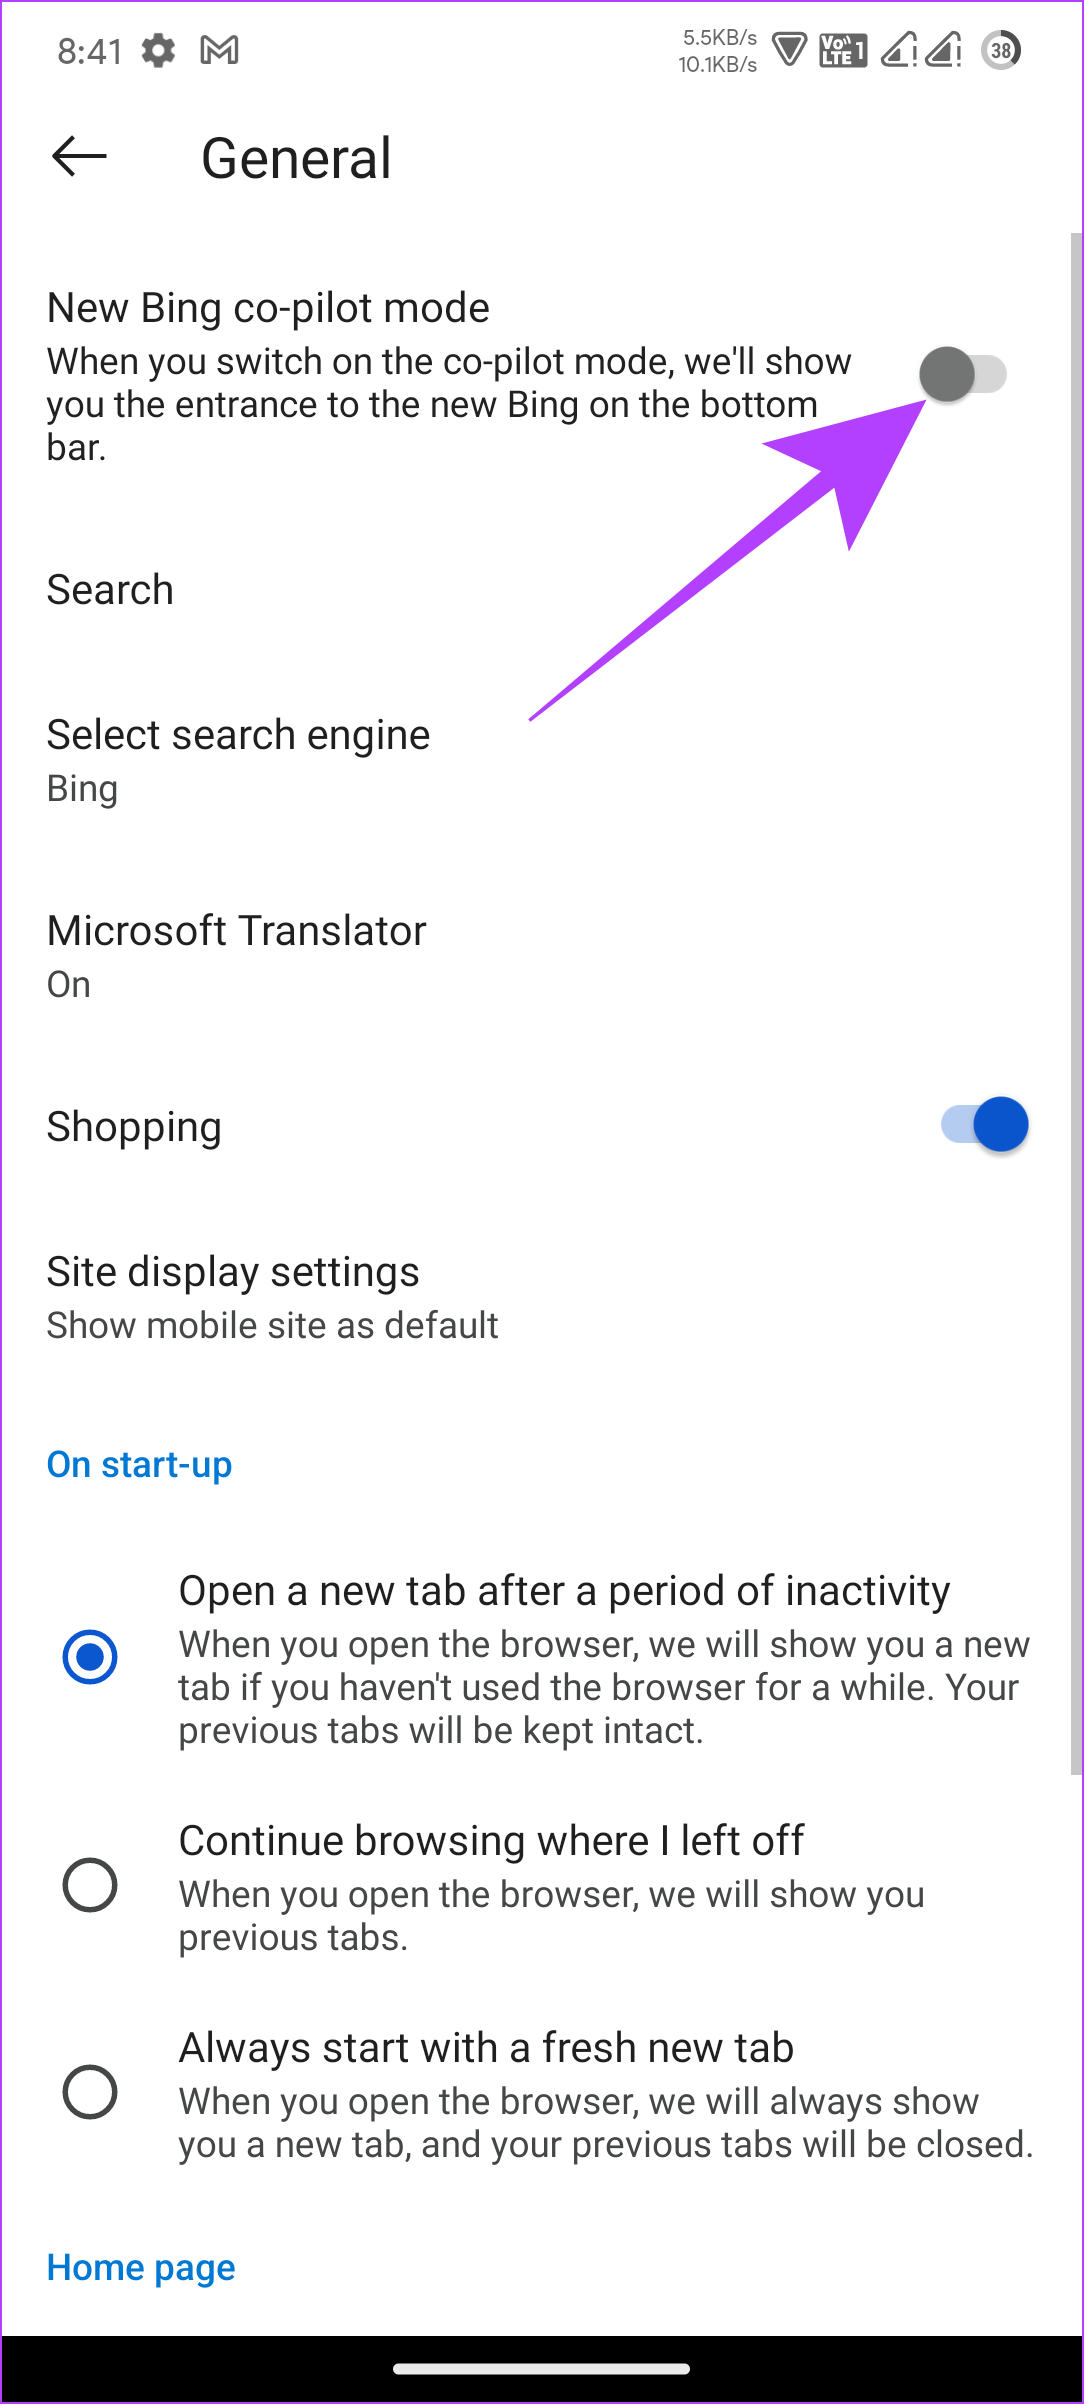 toggle on new Bing co pilot mode